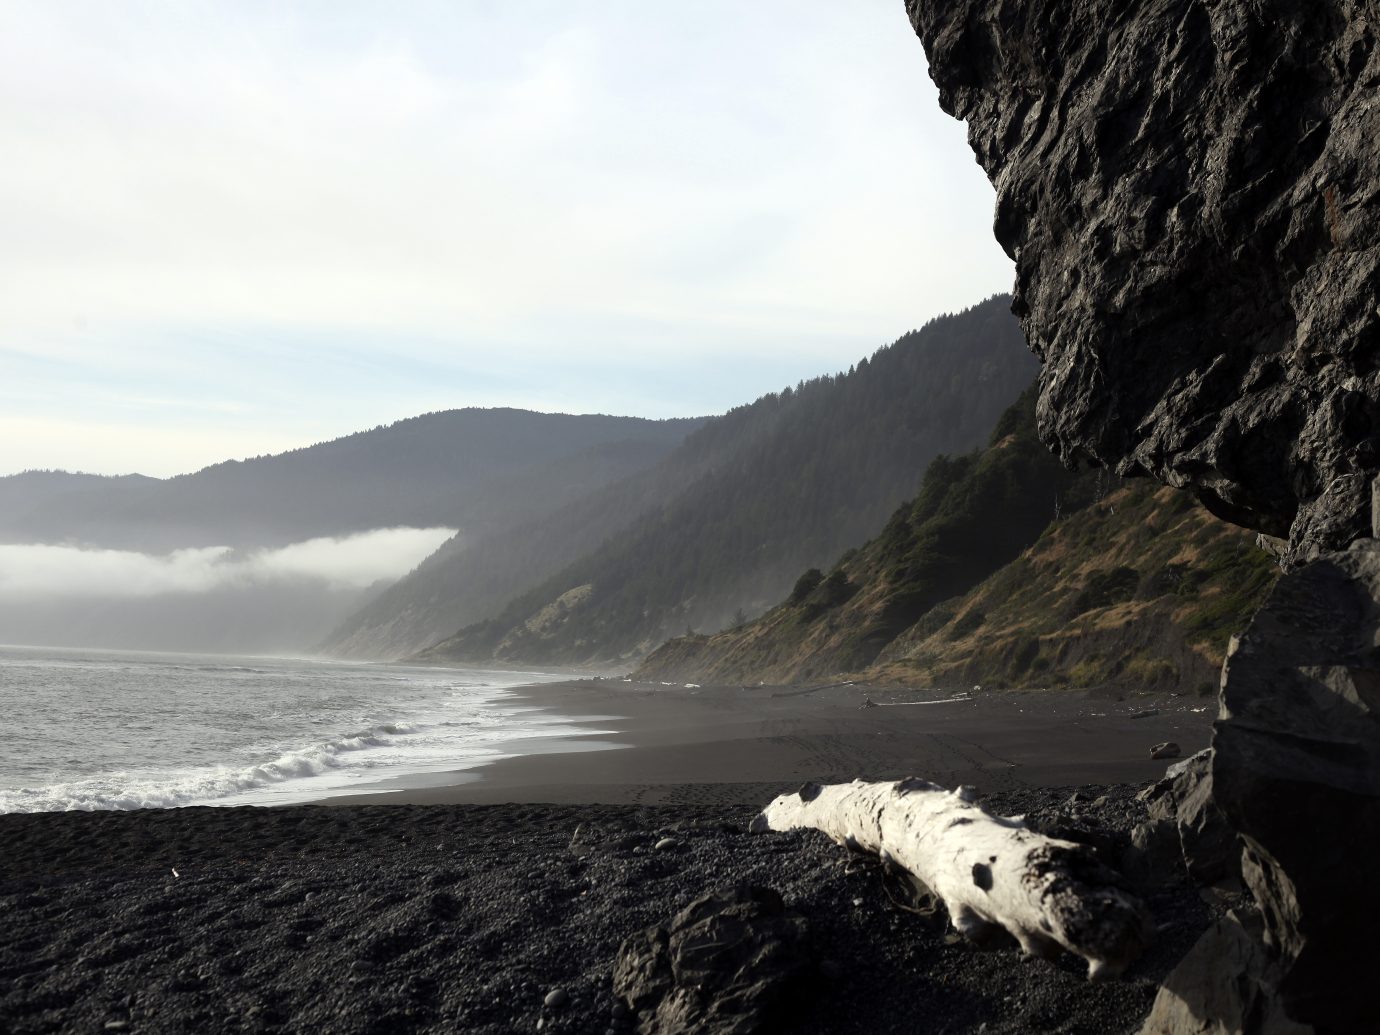 Black Sands Beach, Eroded cliffside along the isolated sands of Northern California's Lost Coast